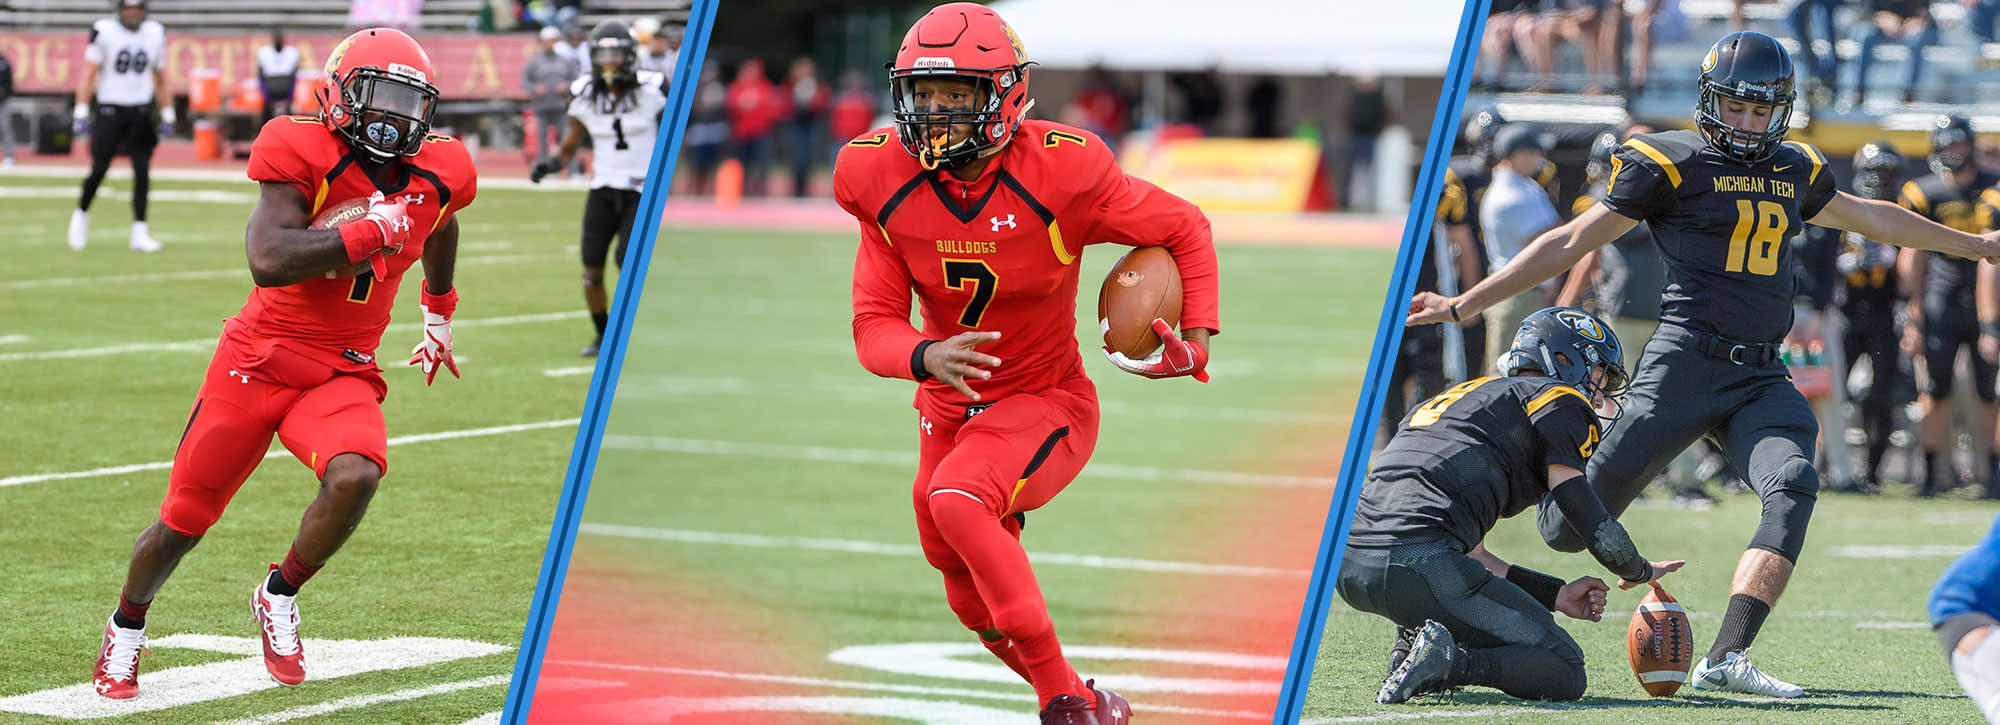 Ferris State's Campbell & Stephenson, Michigan Tech's Zeboor Claim GLIAC Football Player of the Week Accolades